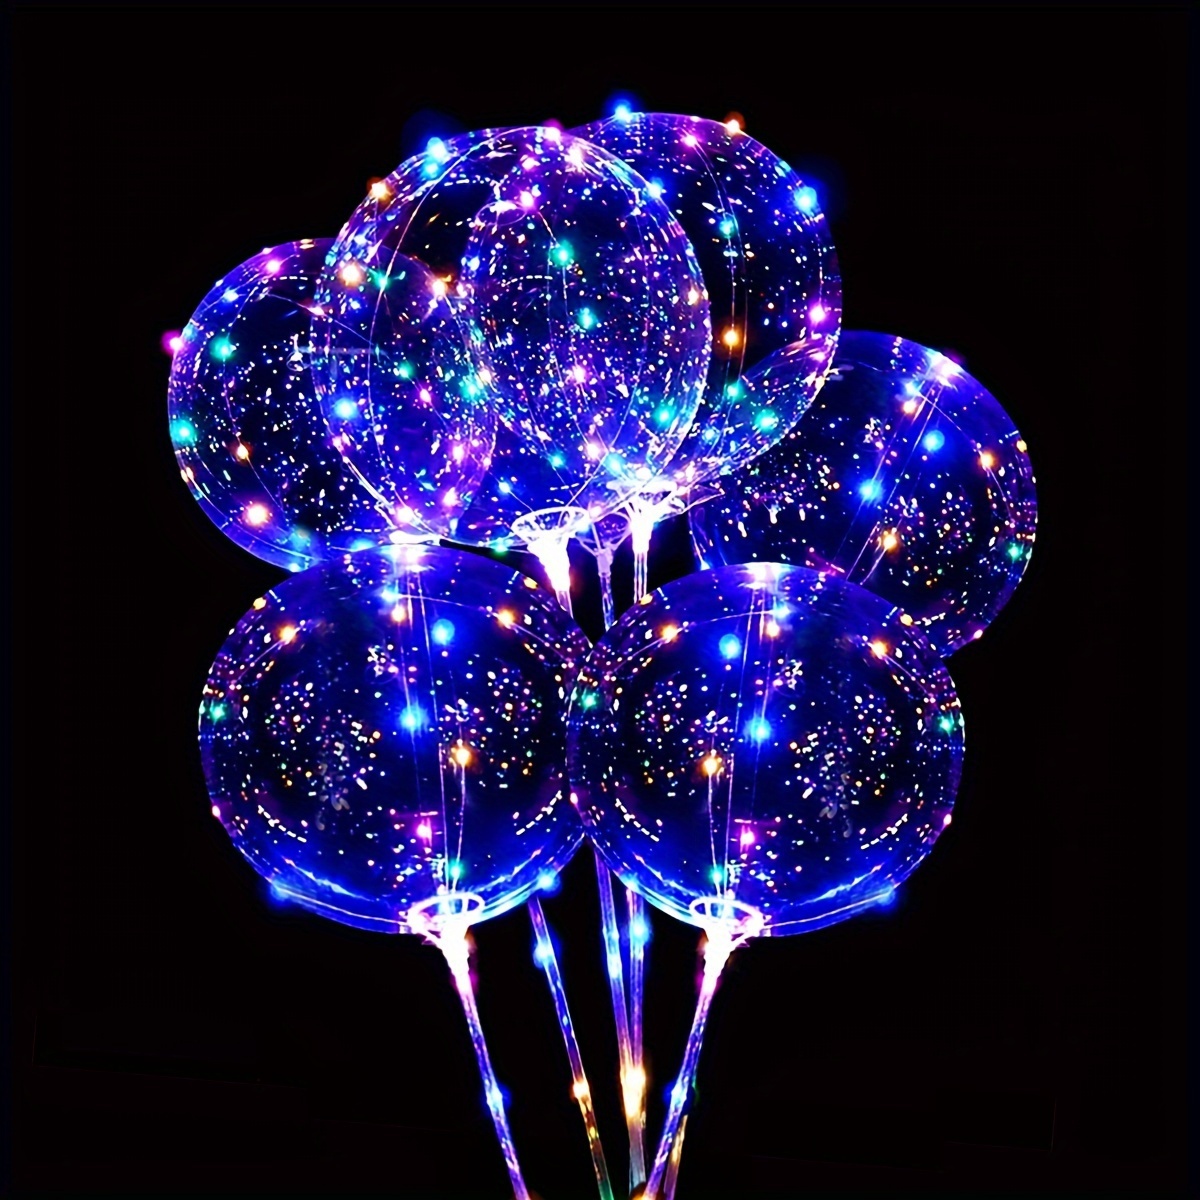 

18pcs Led Light String, Bubble Ball With Balloon Rod, Suitable For Light-up Parties, Birthday Parties, Weddings, Valentine's Day, Mother's Day Decorations Eid Al-adha Mubarak